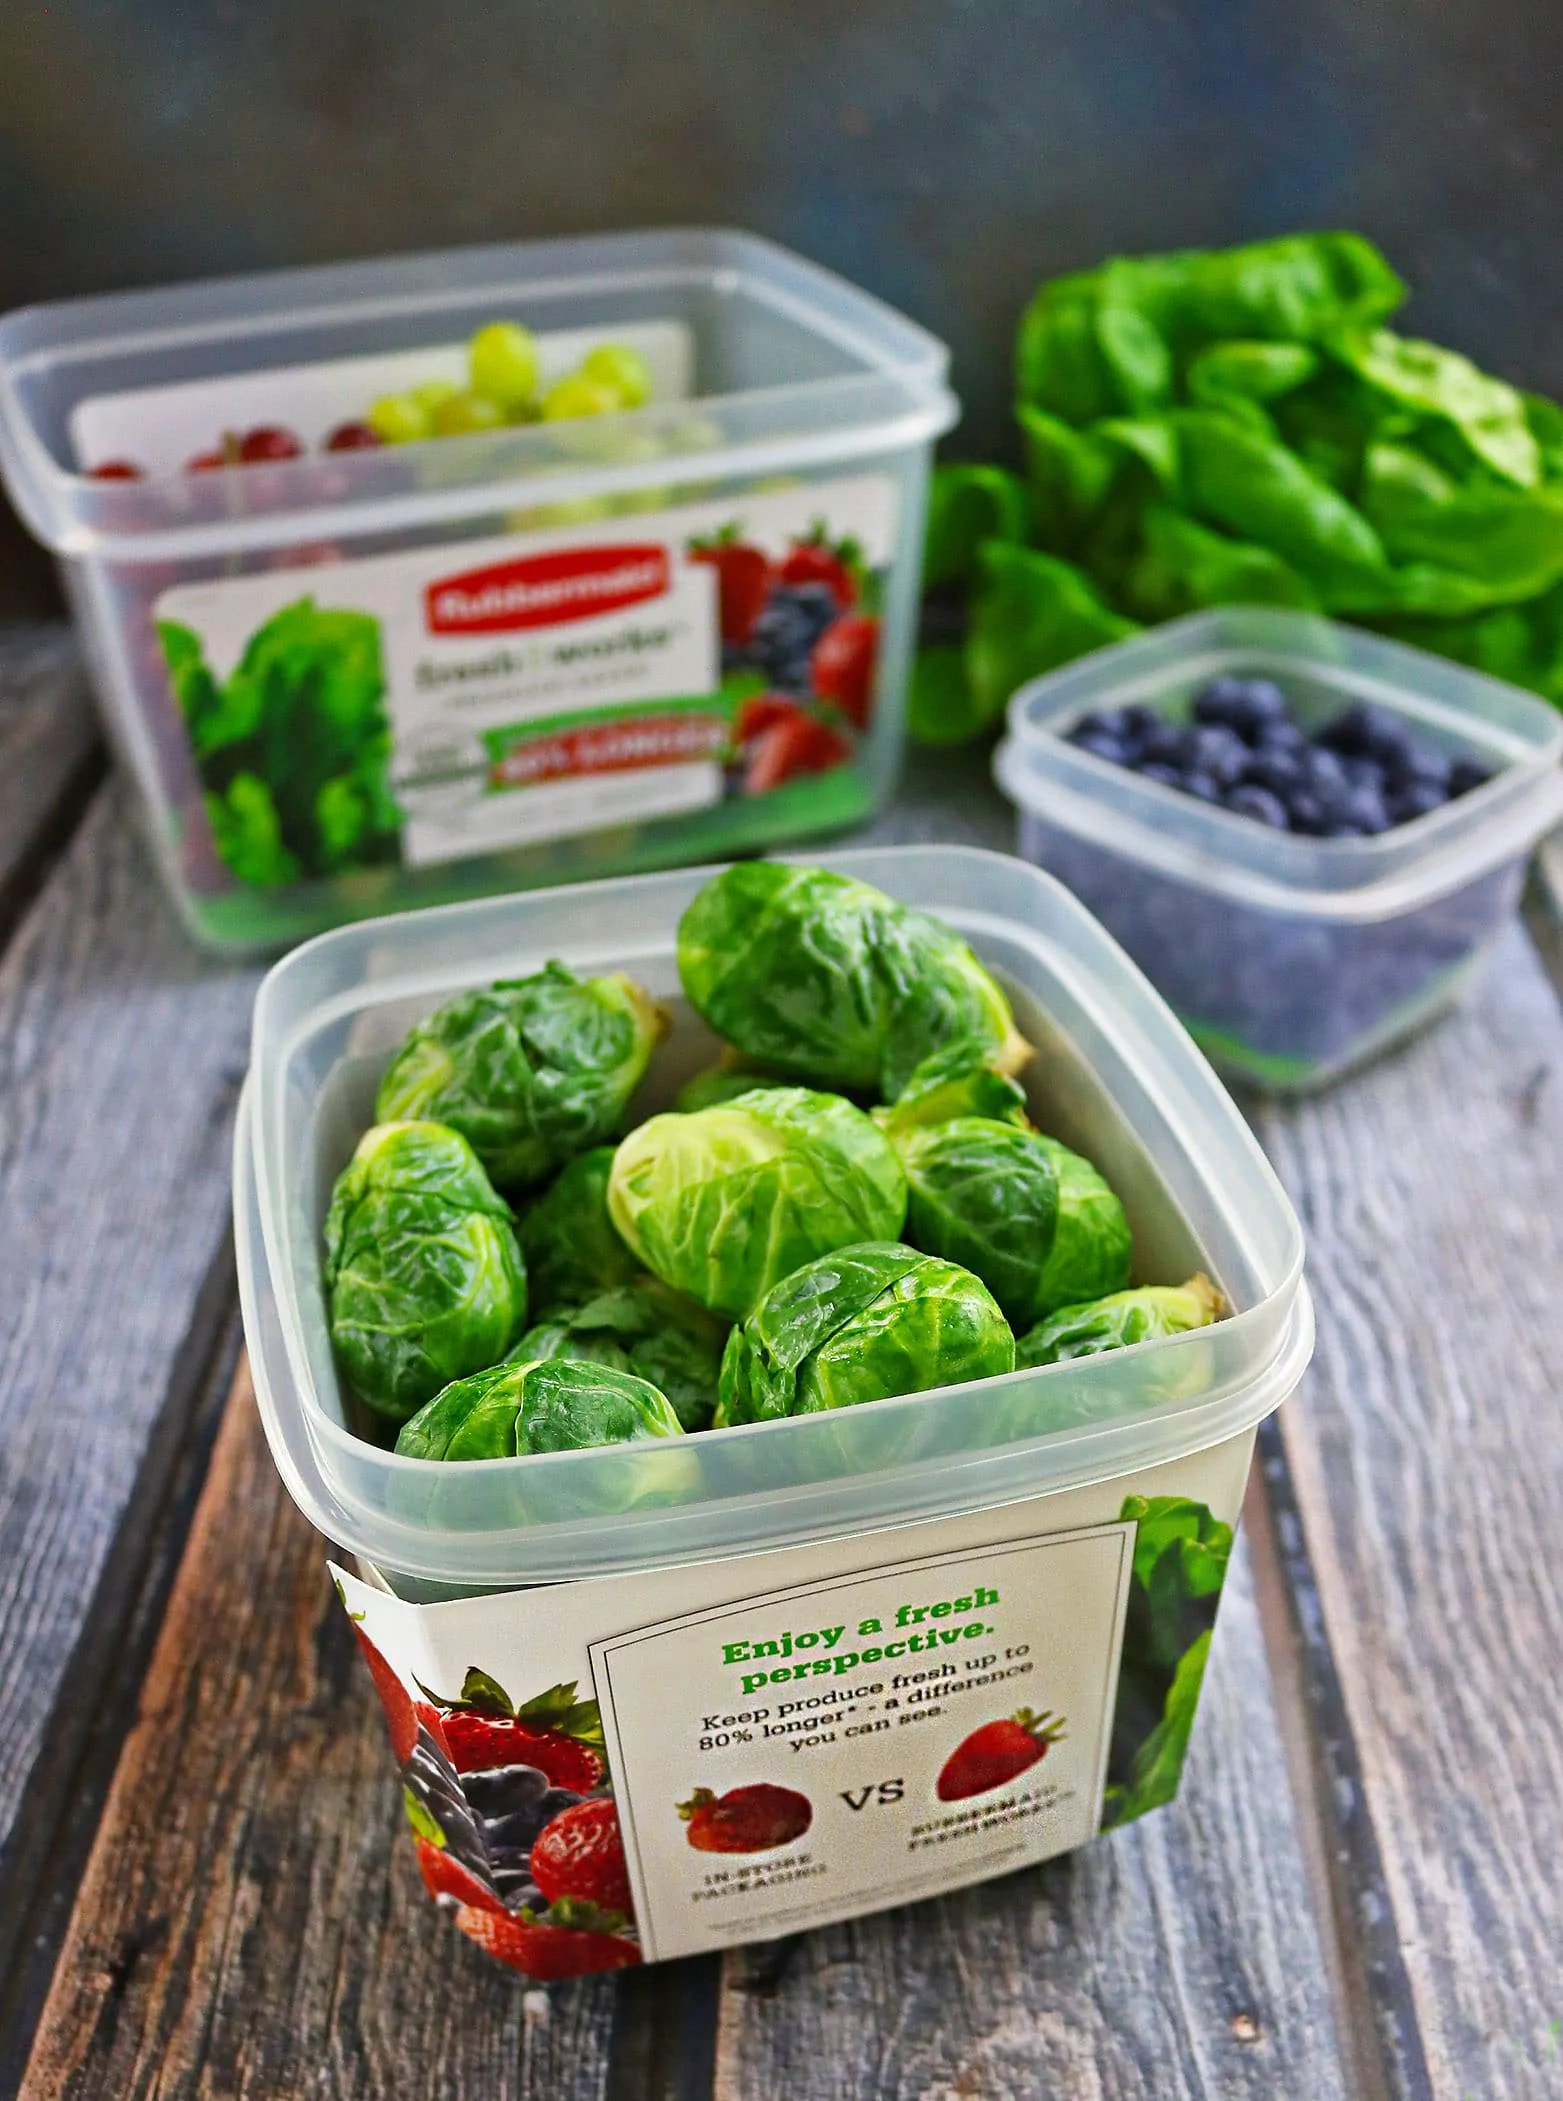 New Rubbermaid Fresh Works Containers